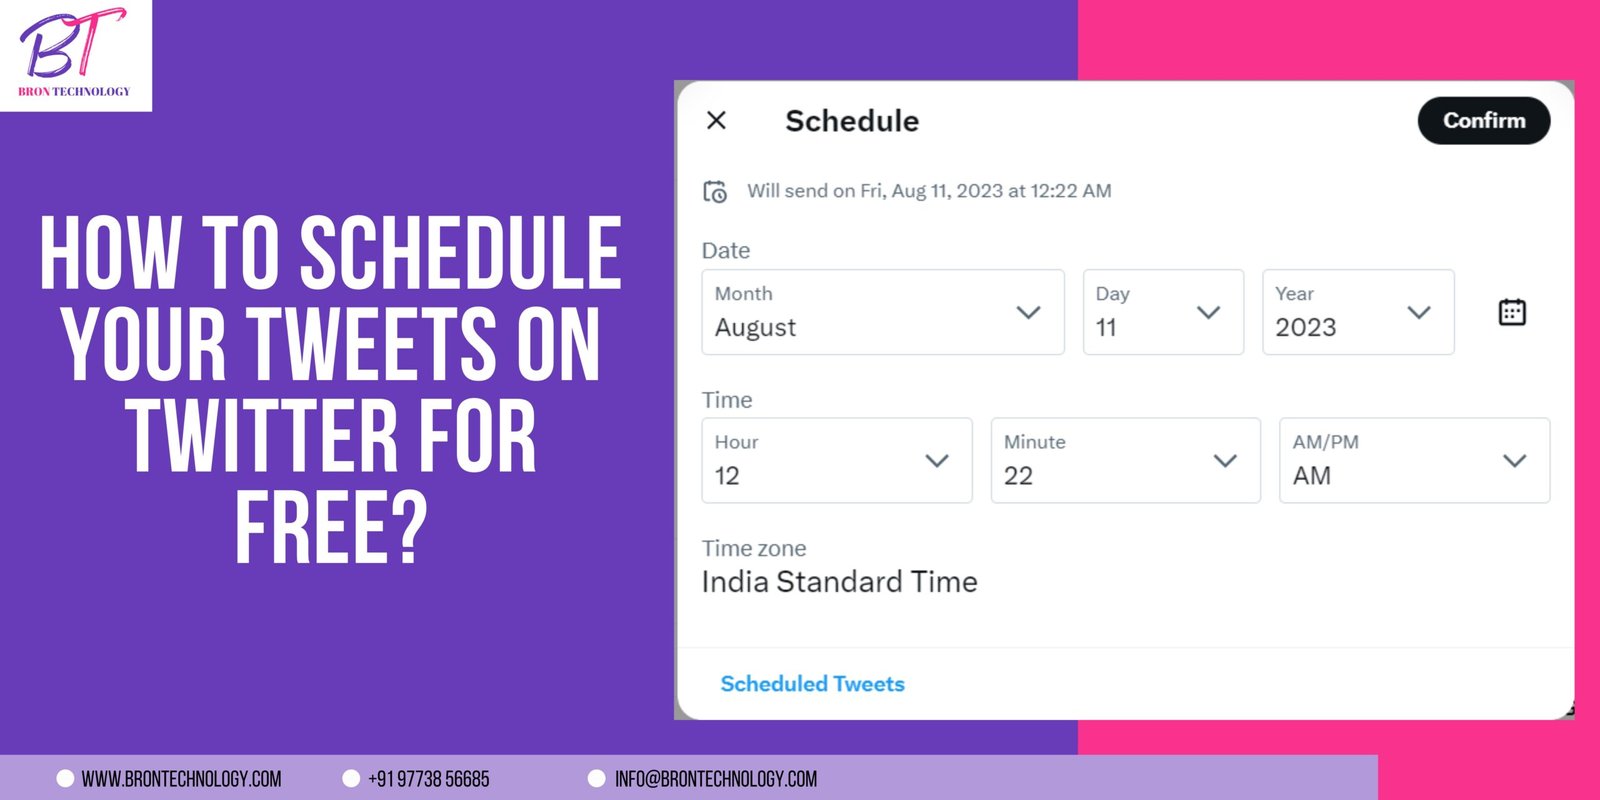 How to Schedule Your Tweets on Twitter For Free?